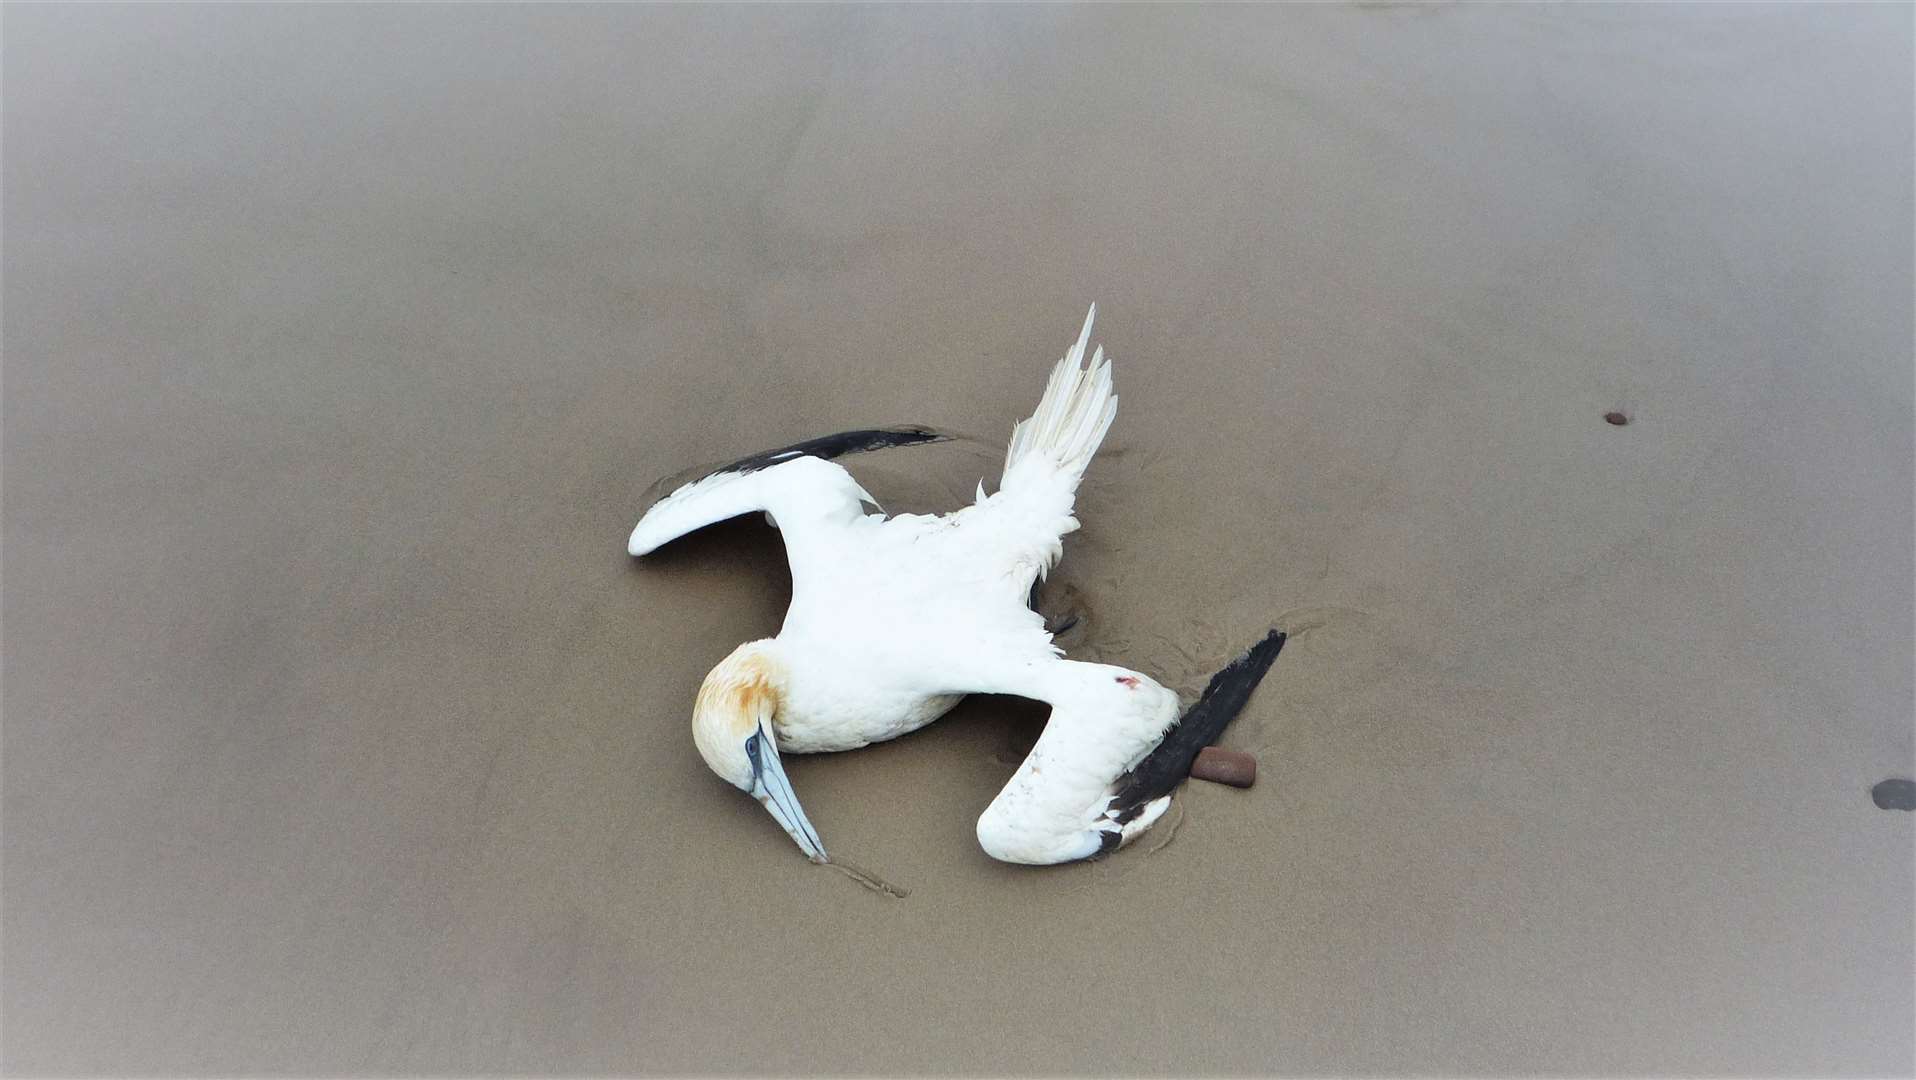 Dead birds have been found washed ashore on beaches across the north. Picture: DSG